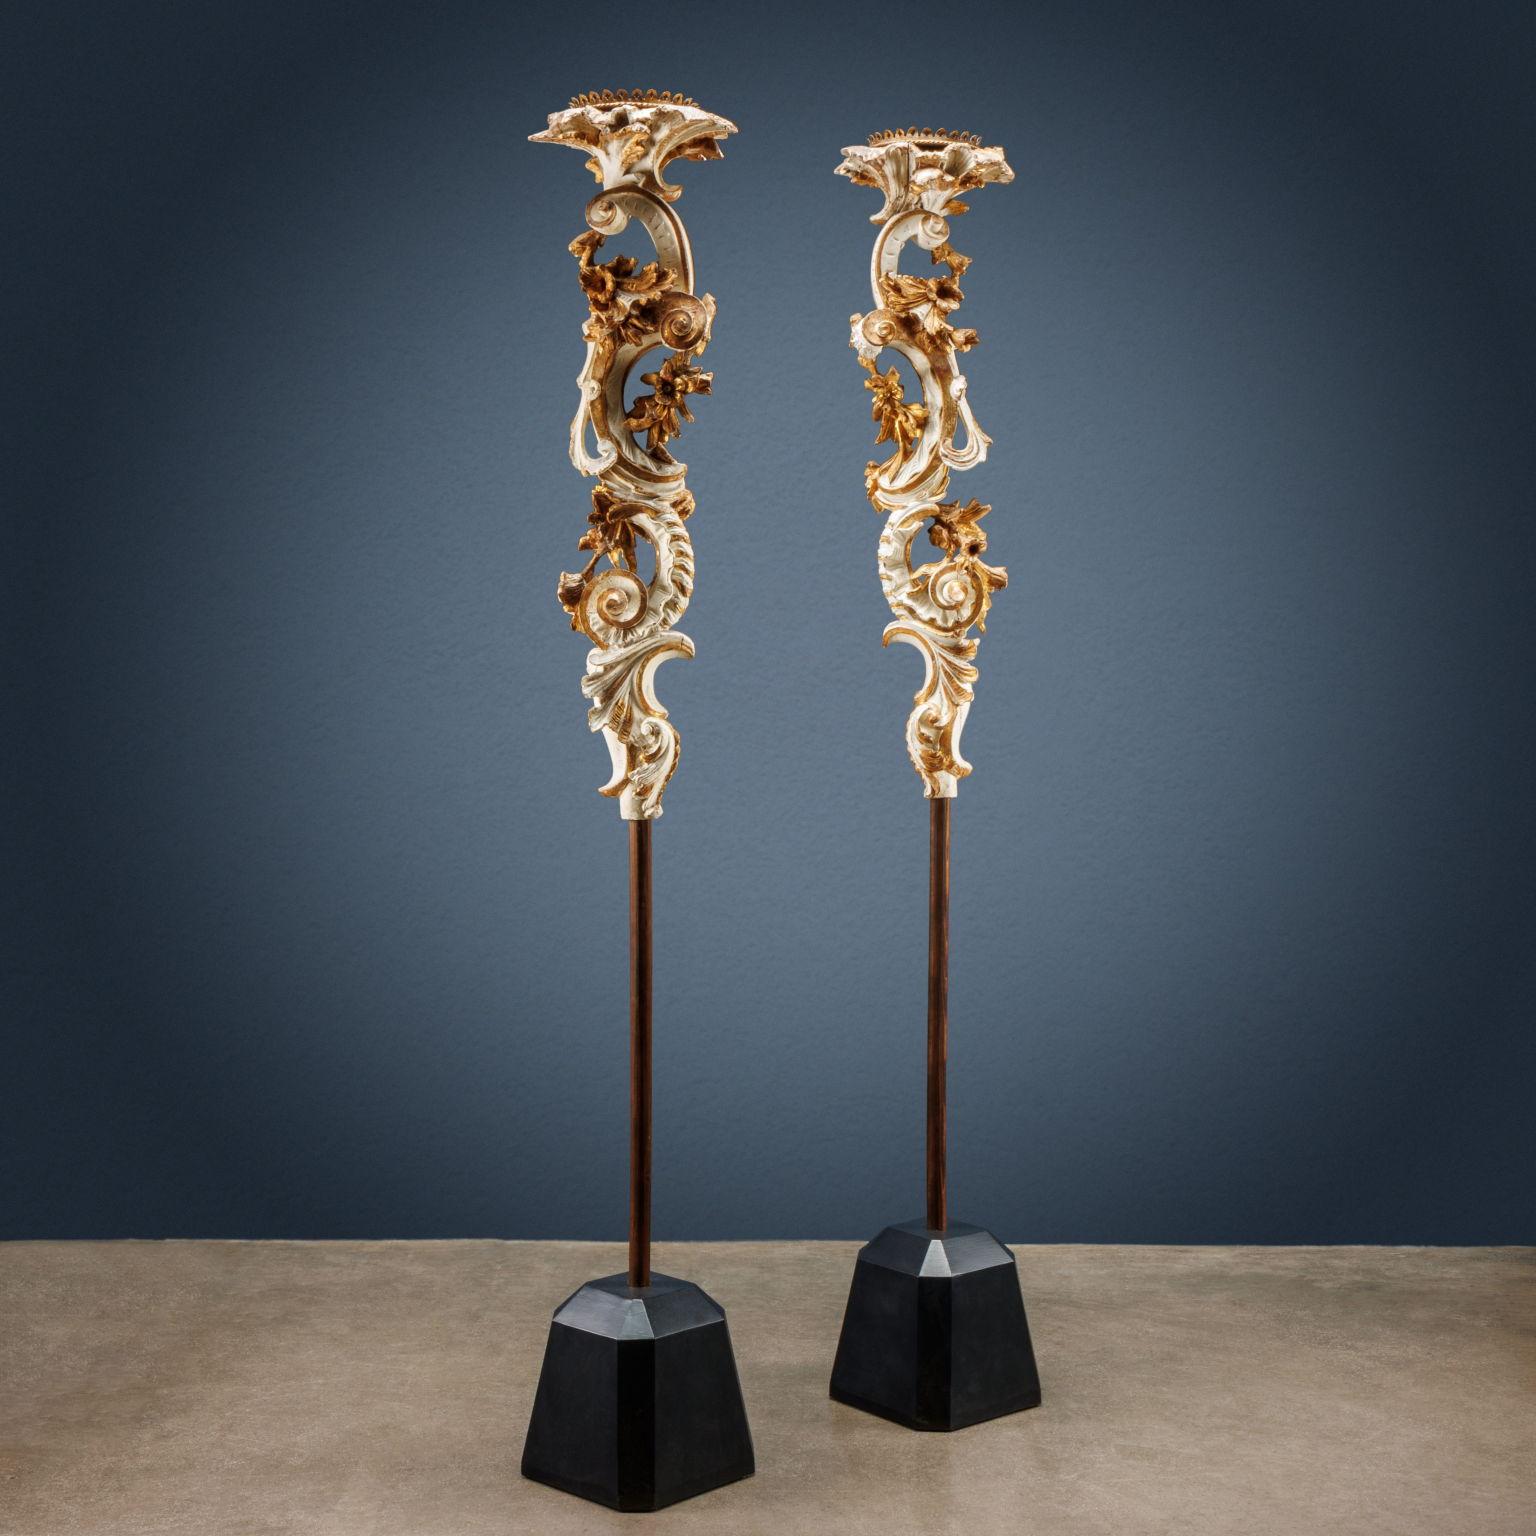 Pair of lamp-holders in carved pine wood, lacquered white and partially gilded, supported by a cylindrical shaft. Composed of large opposing “C” volutes, they are carved with curls and leaf motifs, embellished by a flowering branch that descends